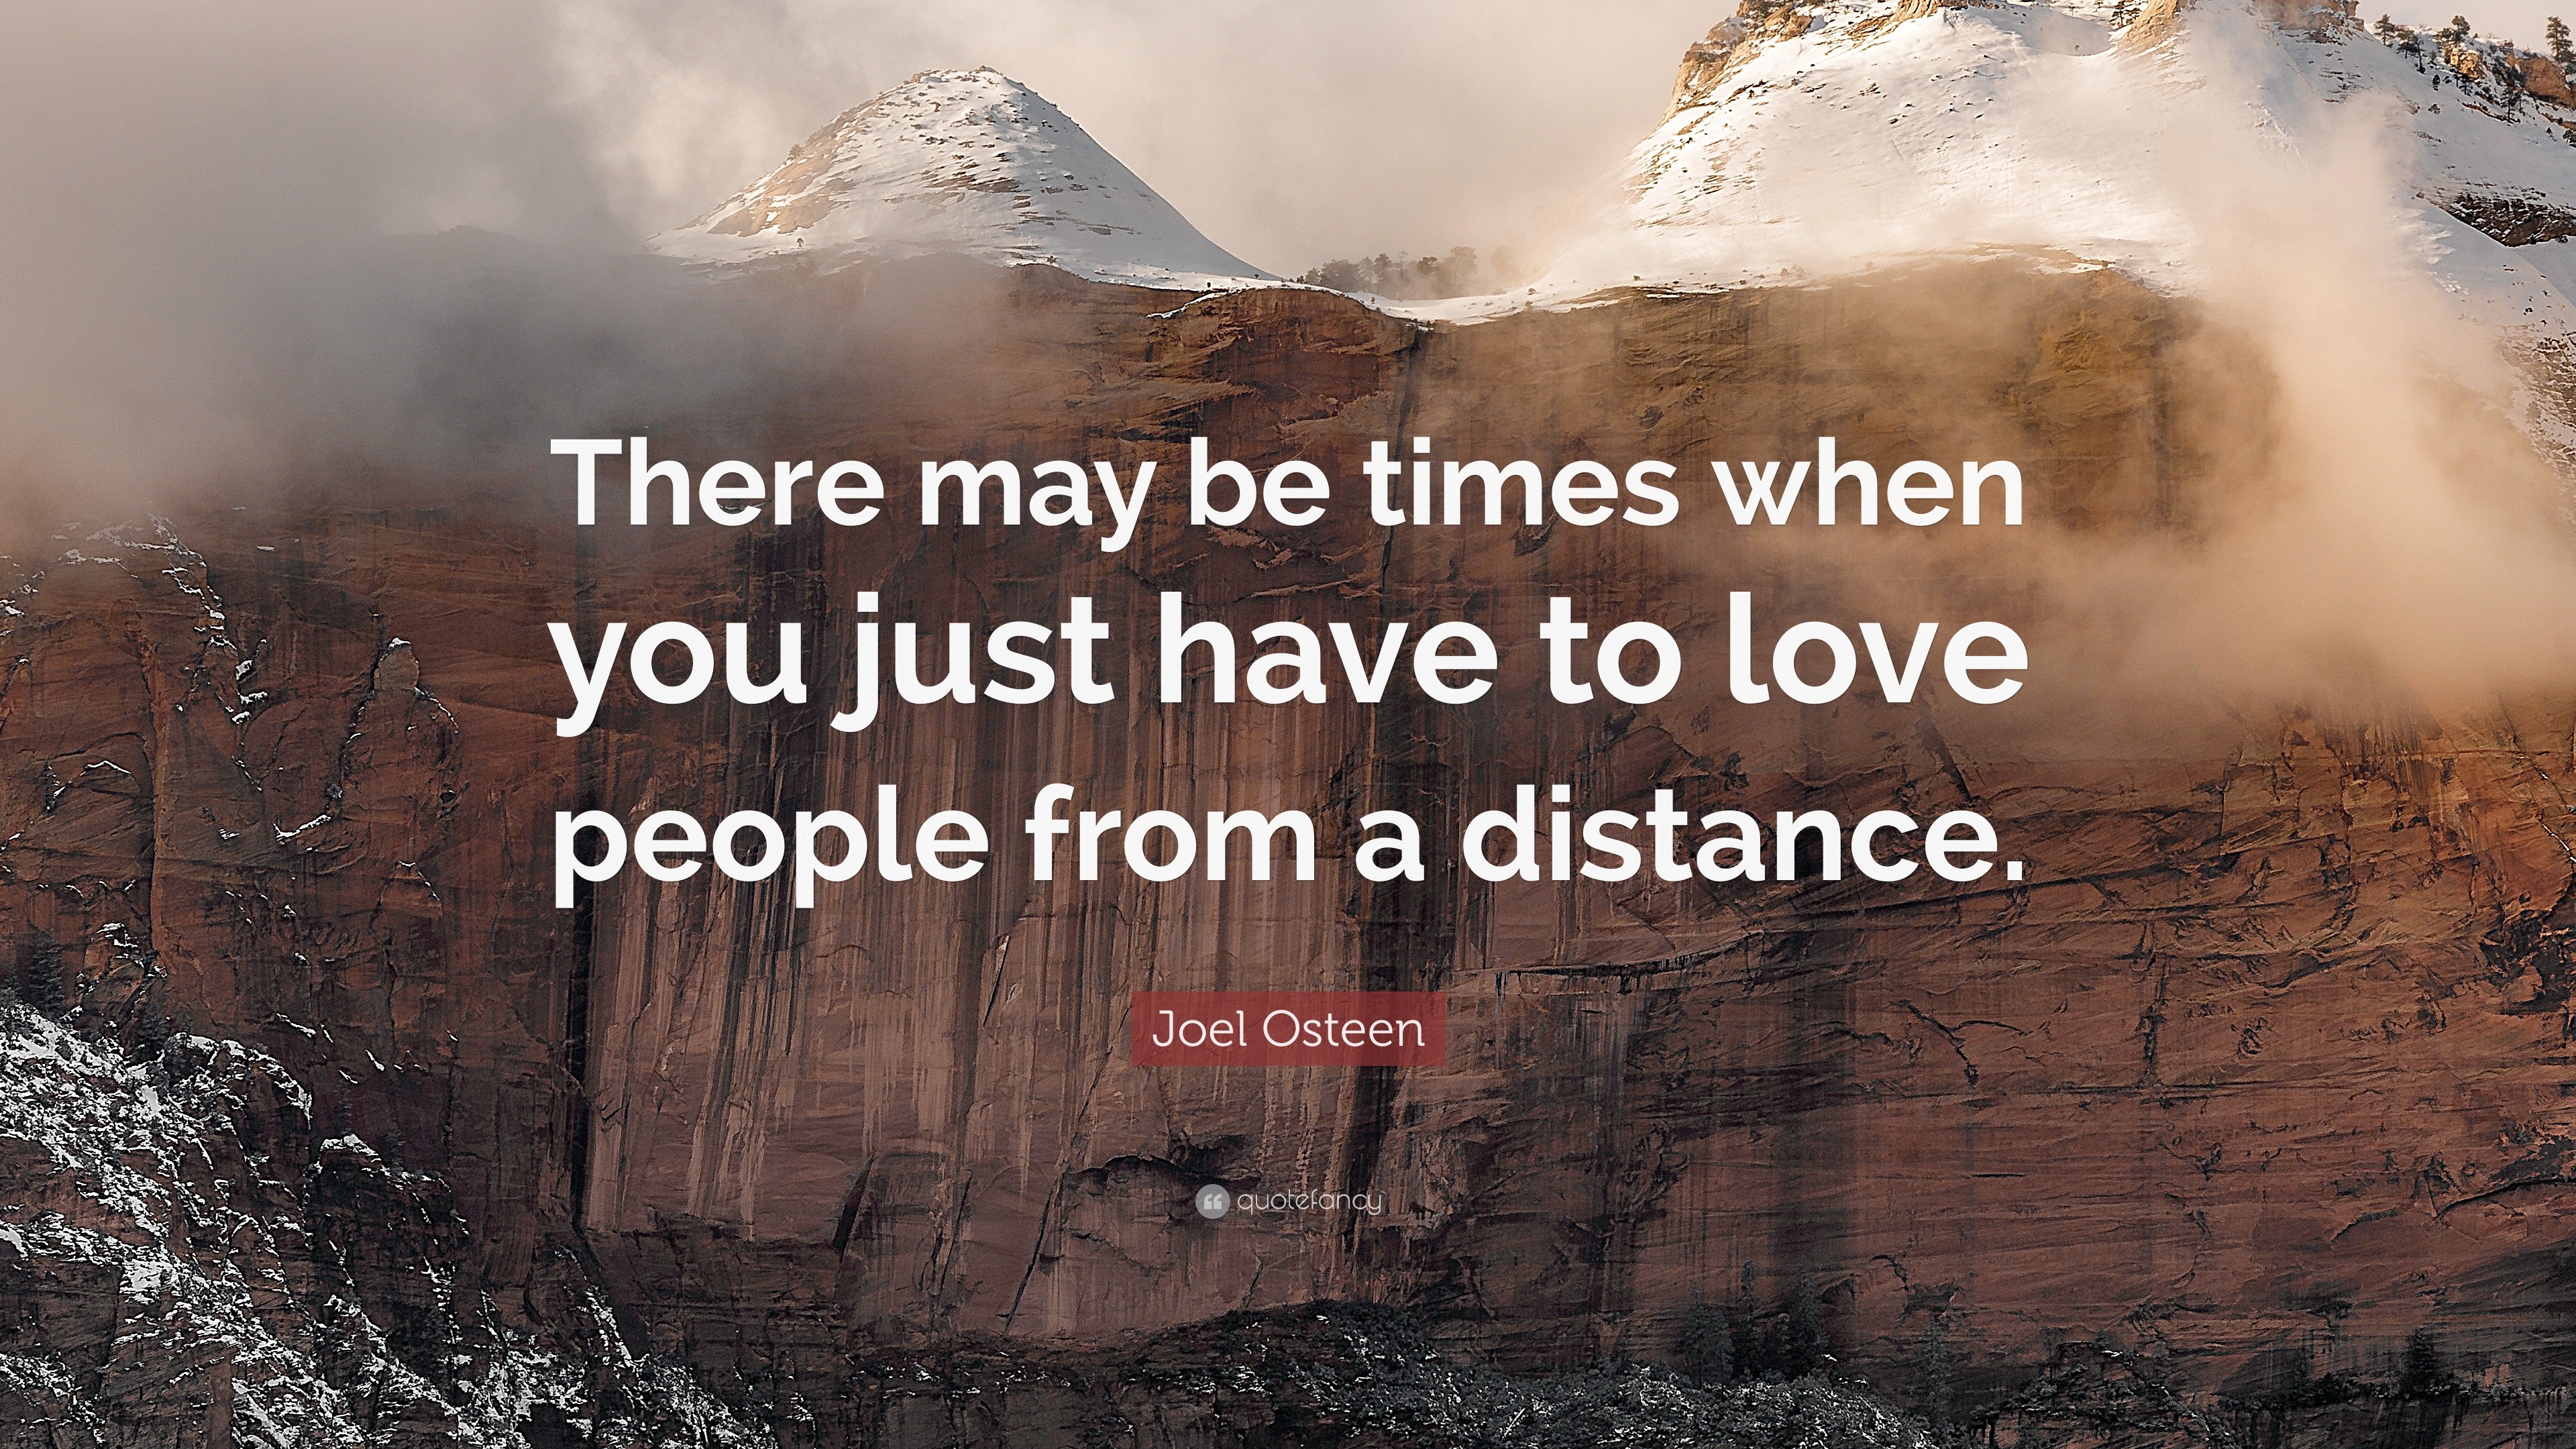 Joel Osteen Quote: “There may be times when you just have to love ...